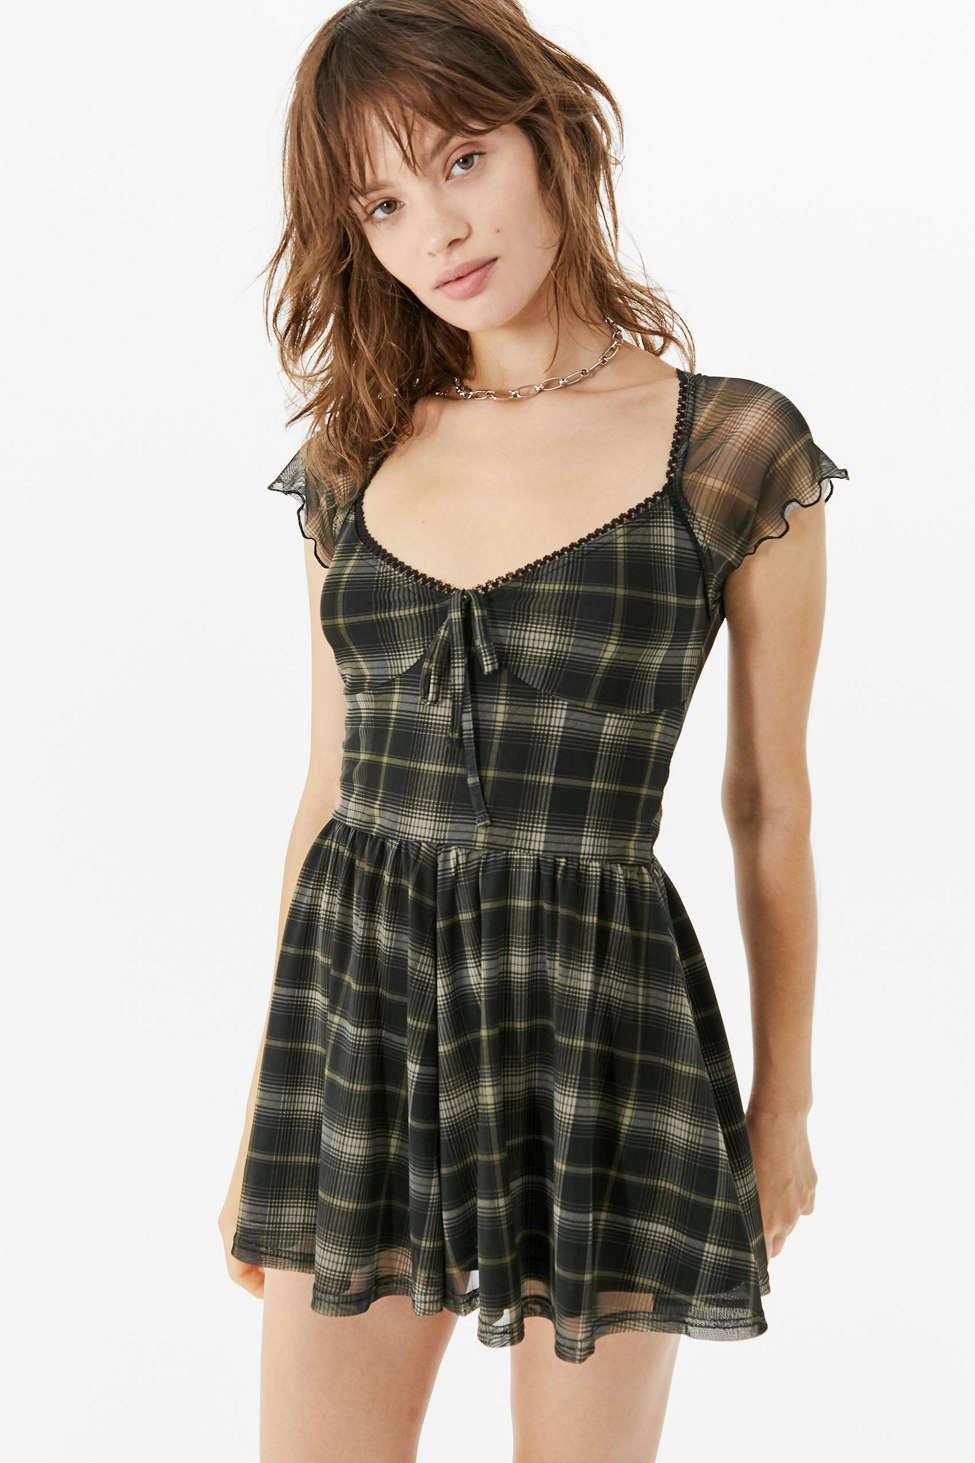 Urban Outfitters Uo Milly Plaid Mesh Romper in Black | Lyst Canada